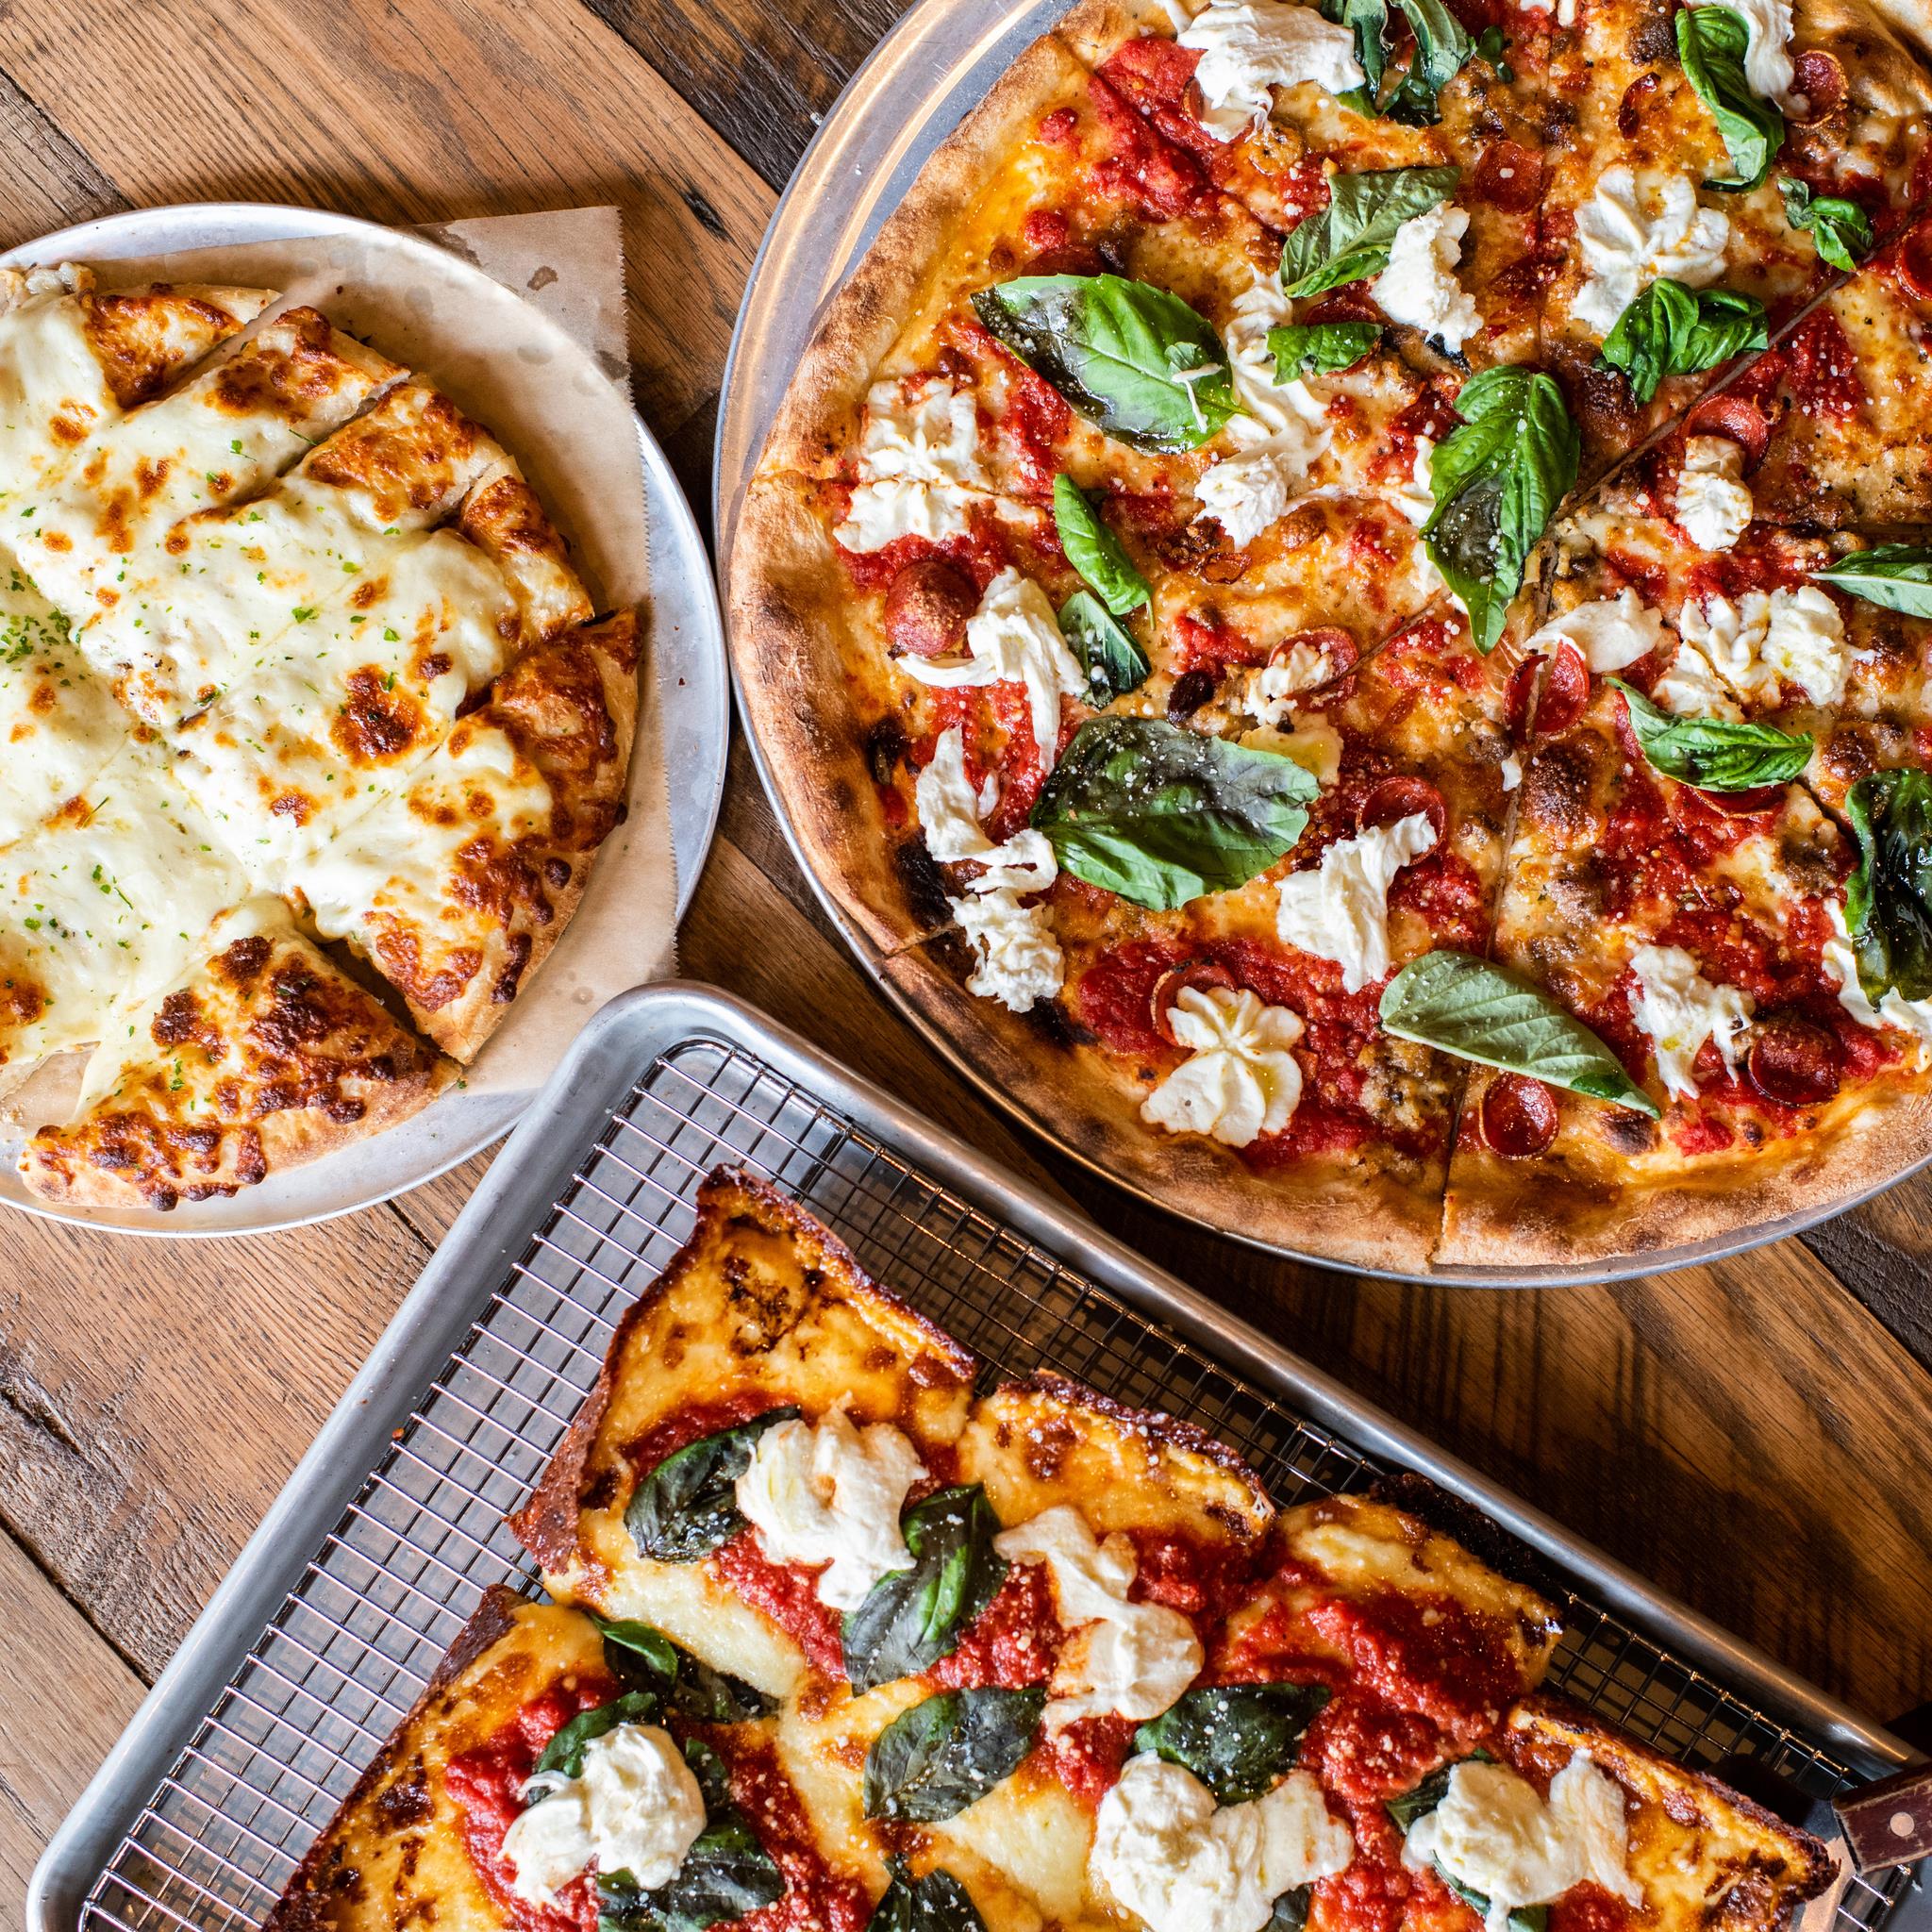 A plate of cheesy bread, a margherita pizza, and a Detroit-Style margherita pizza